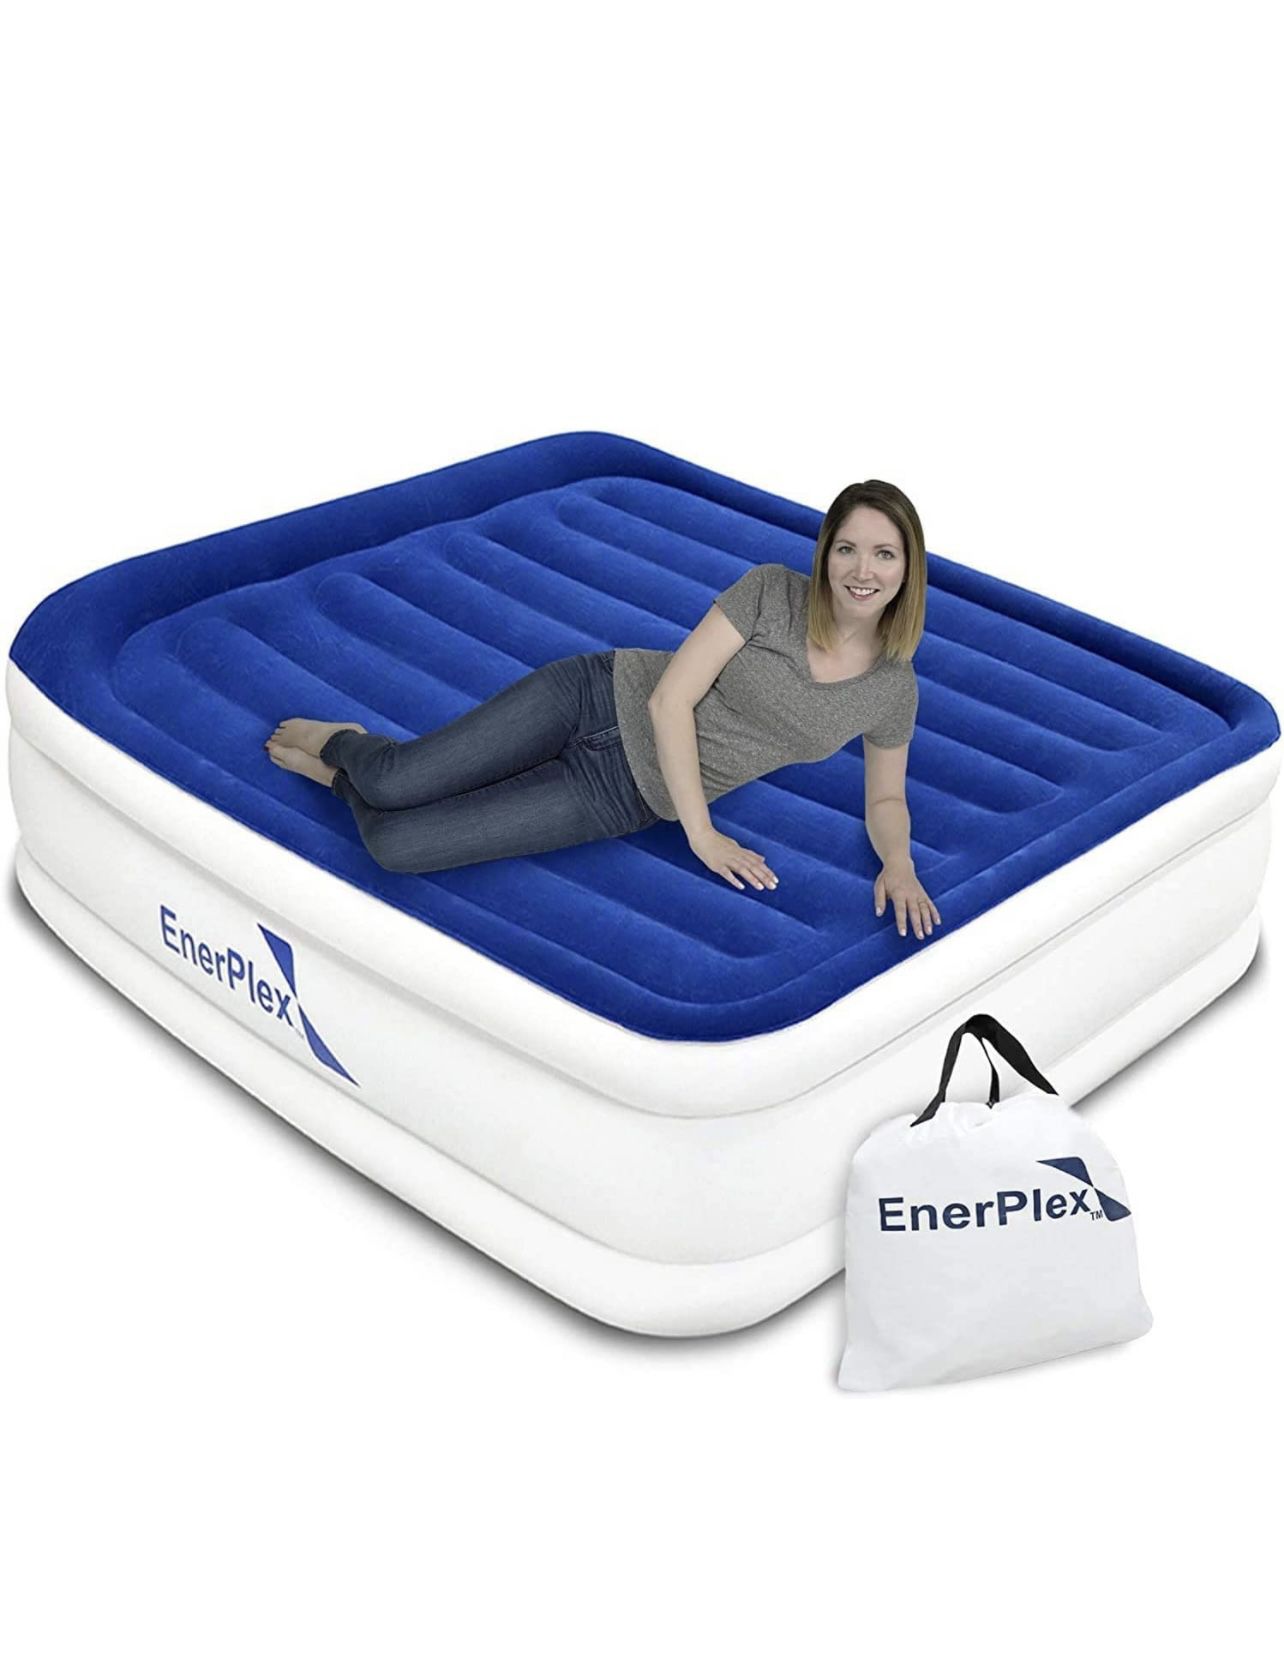 Inflatable Air,bed